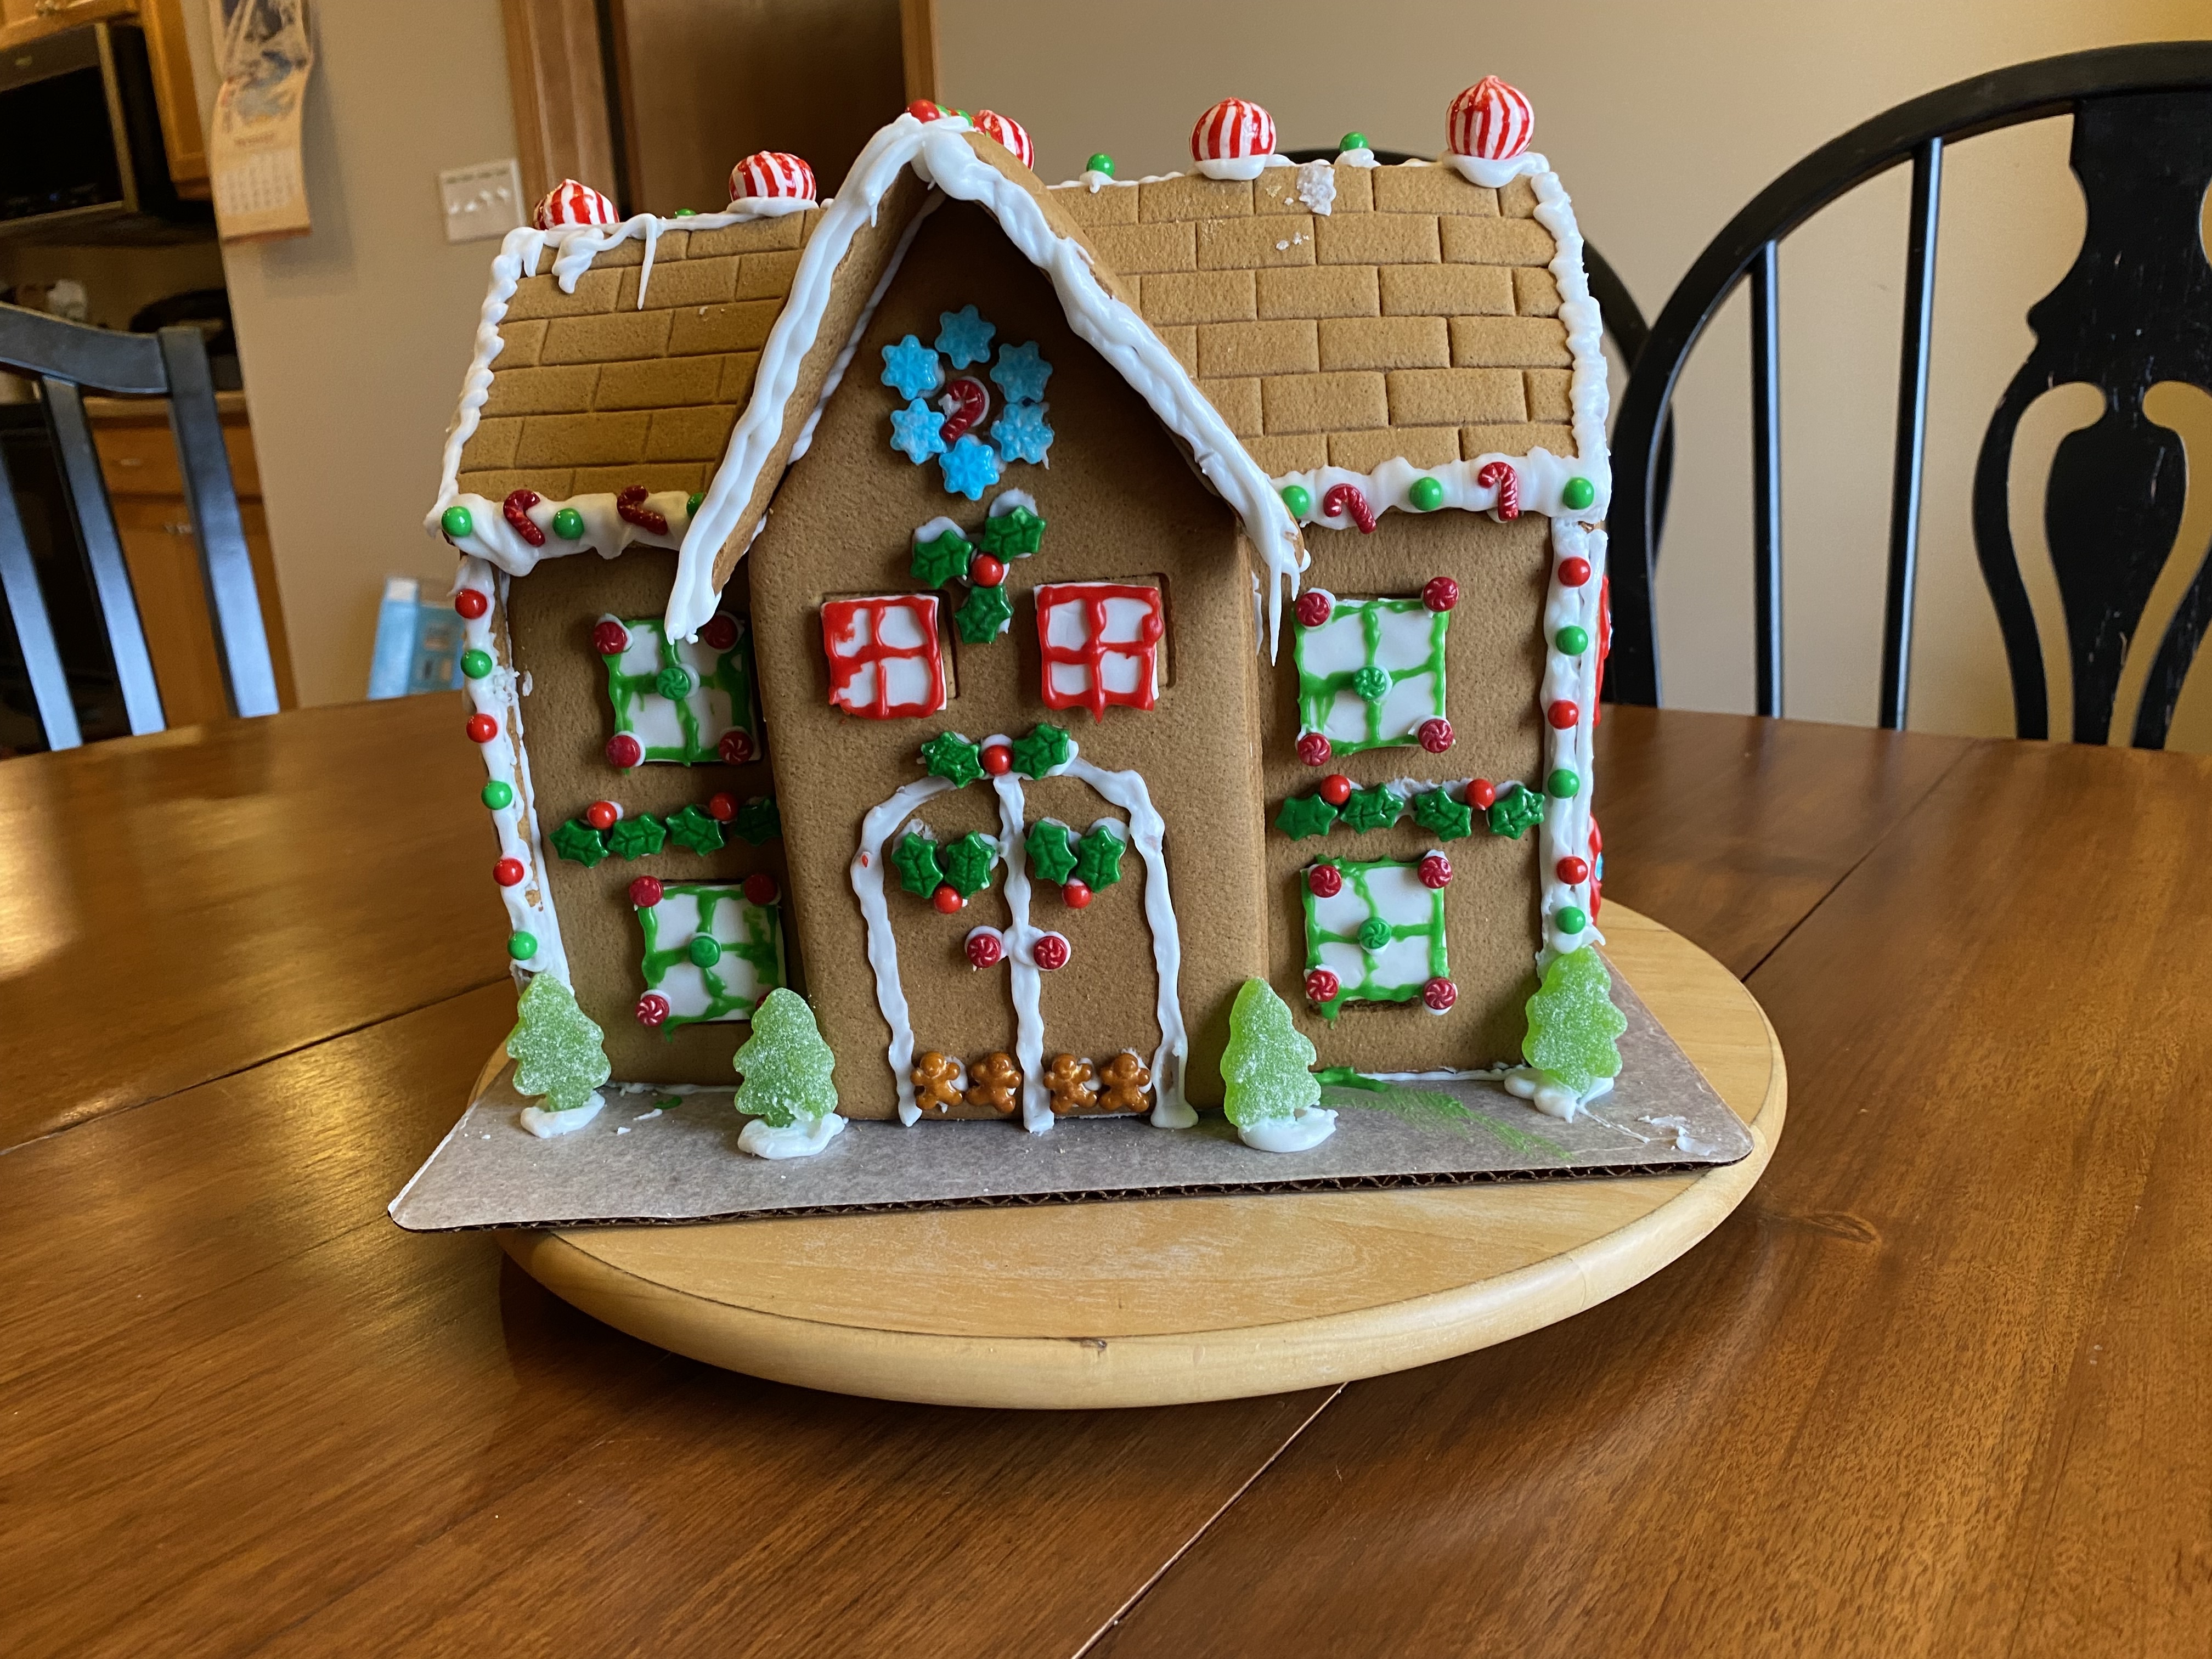 Renee's Mansion Gingerbread House all decorated